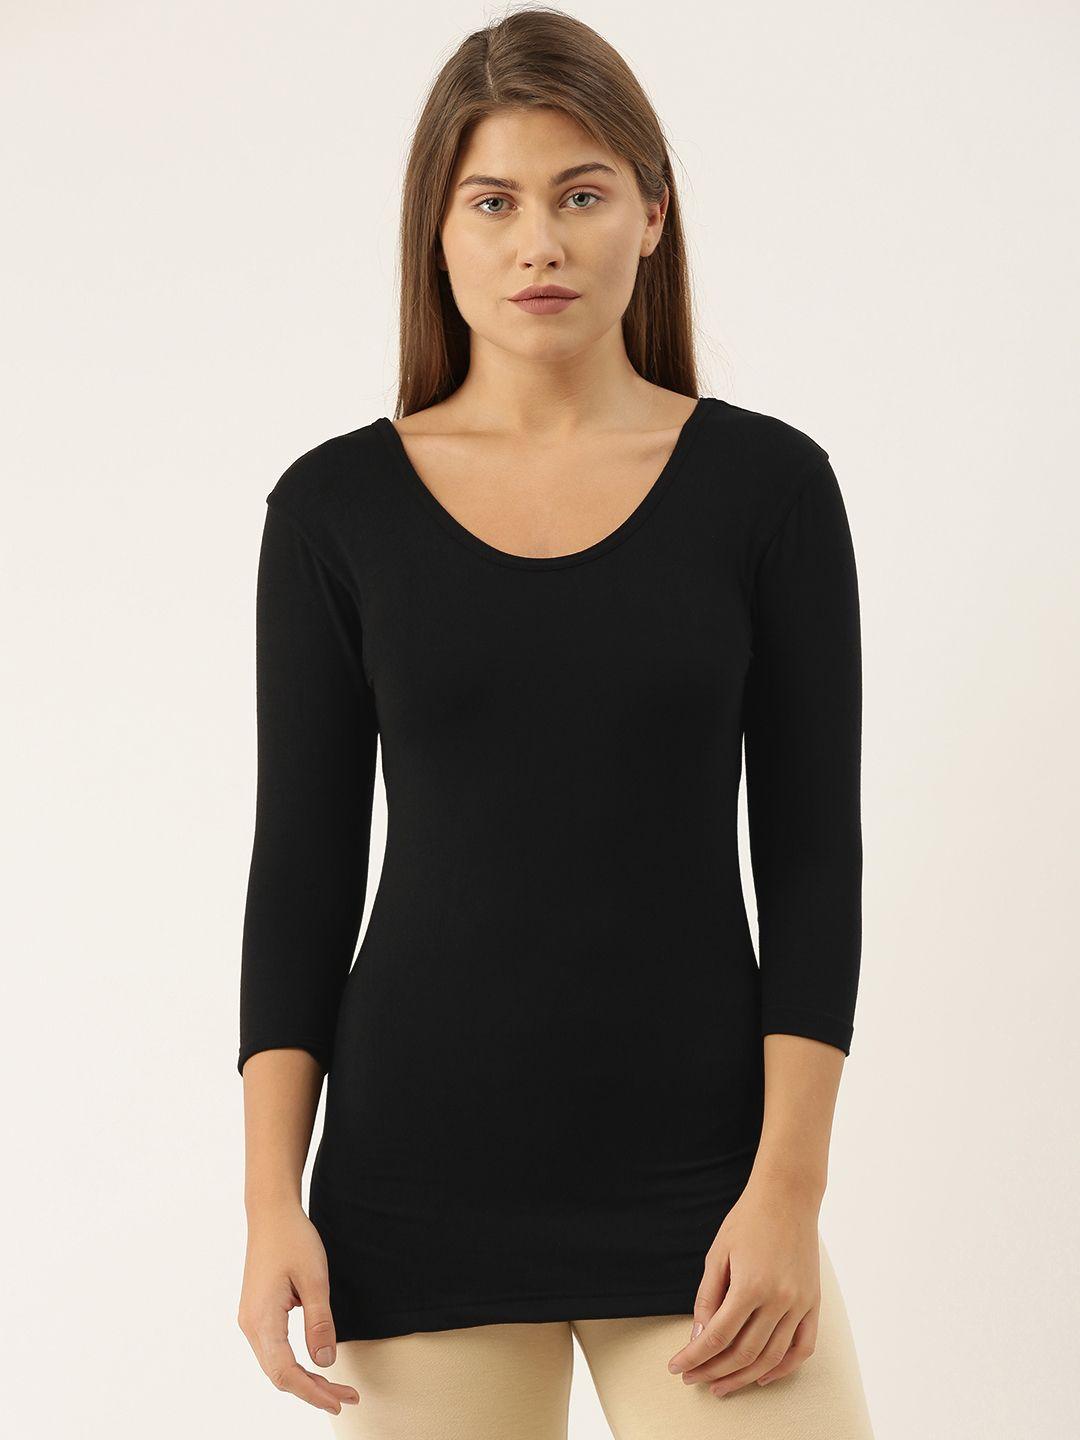 fruit-of-the-loom-woman's-black-solid-thermal-top